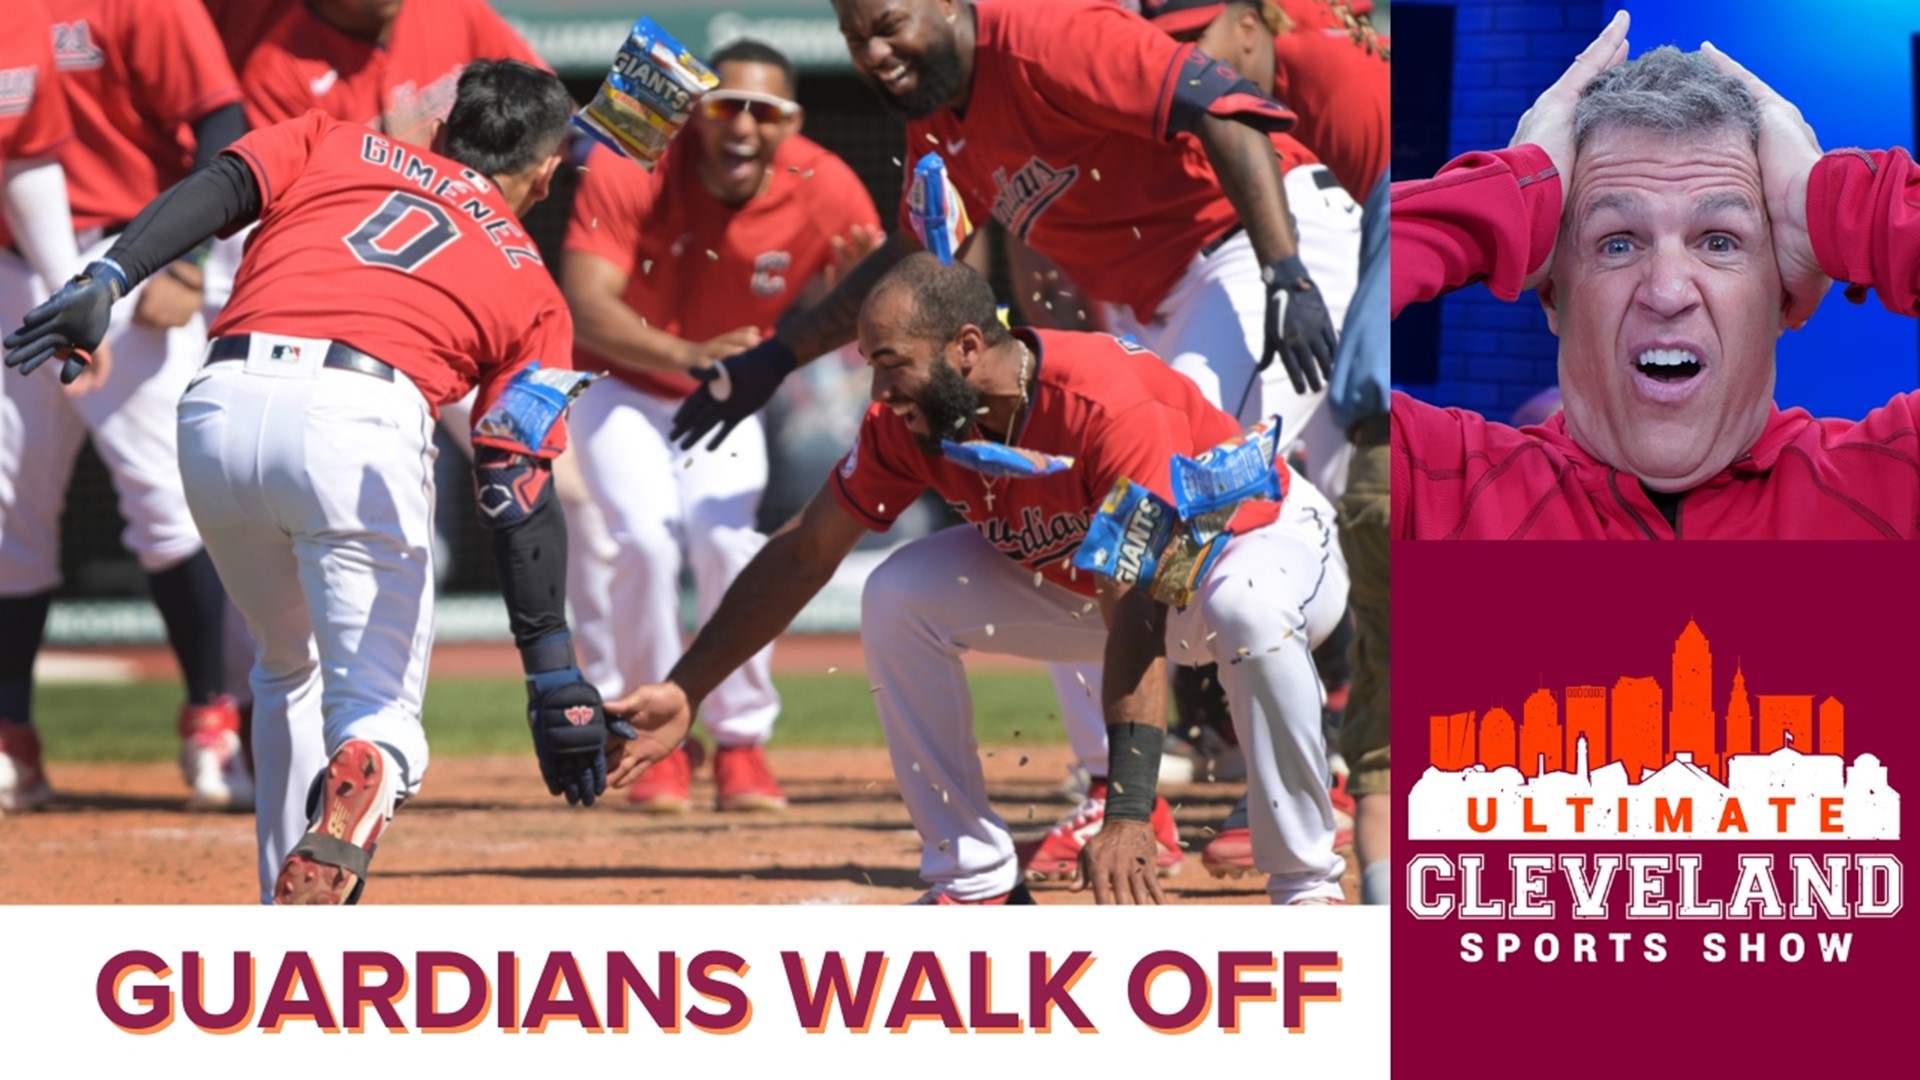 The UCSS guys react and celebrate the Cleveland Guardians' walk-off win against the Minnesota Twins. Guardians made a historical comeback plus more.